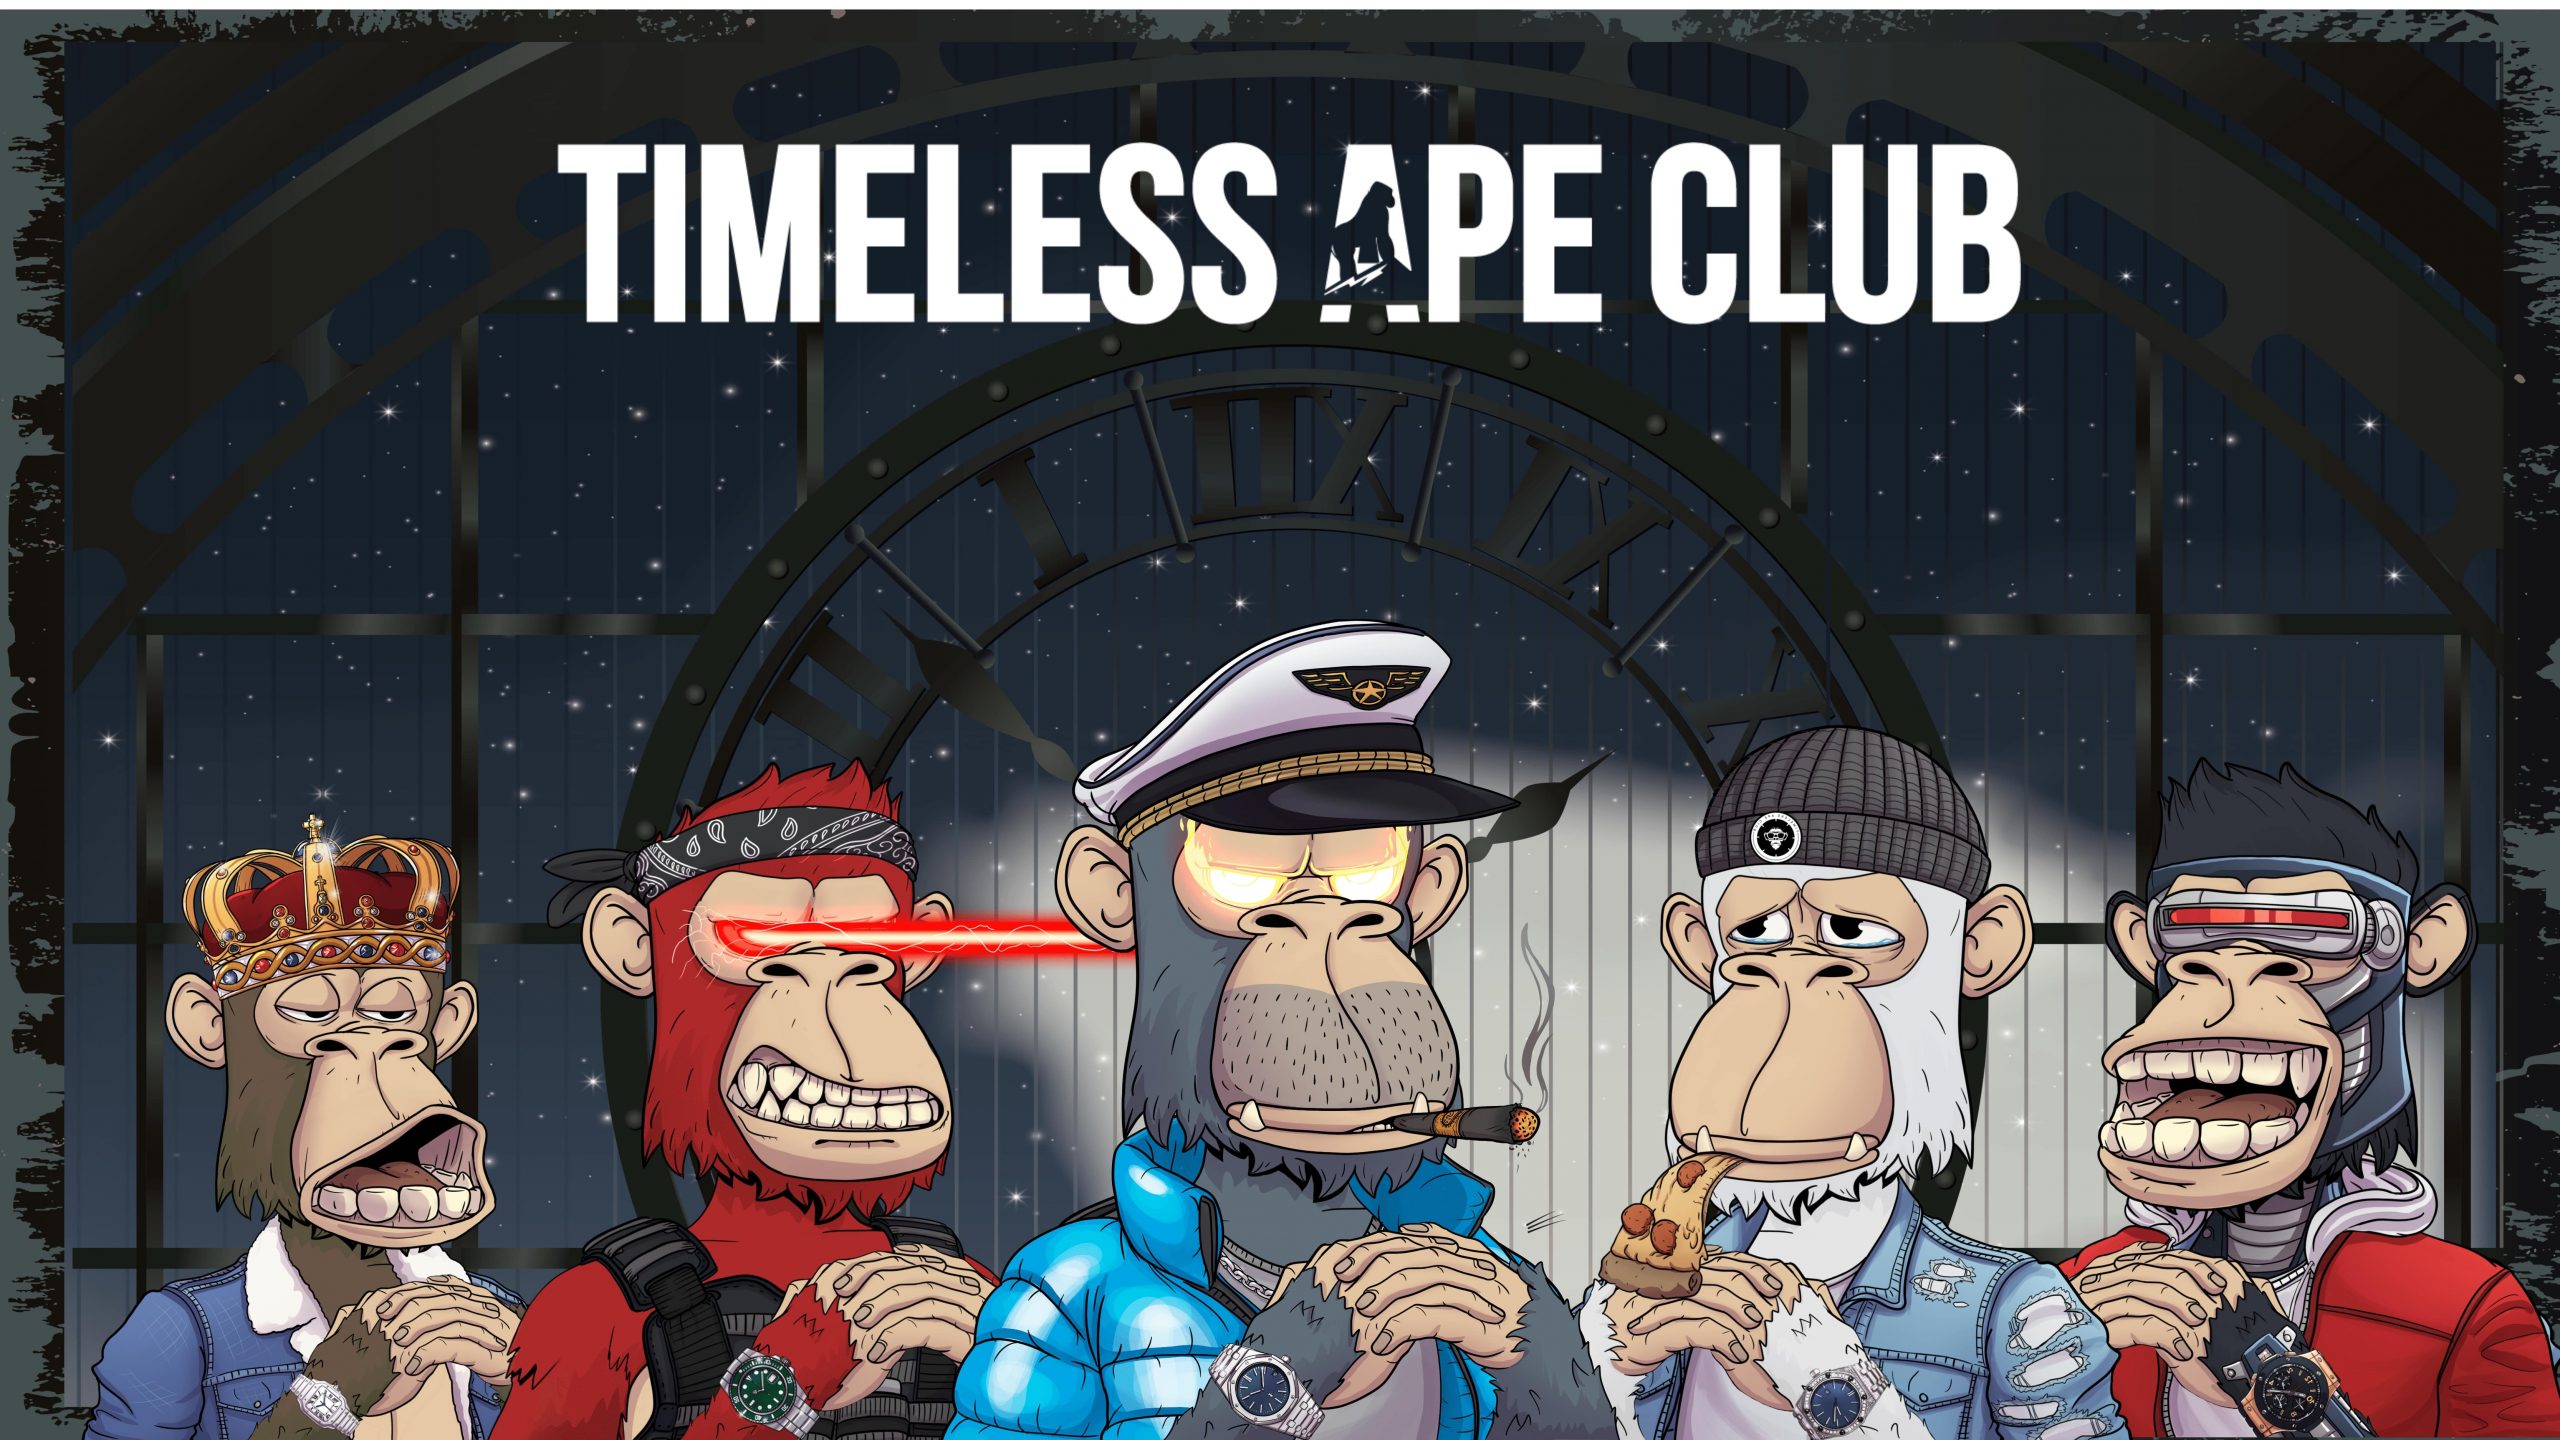 Timeless Ape Club NFT collection featuring Apes wearing watches